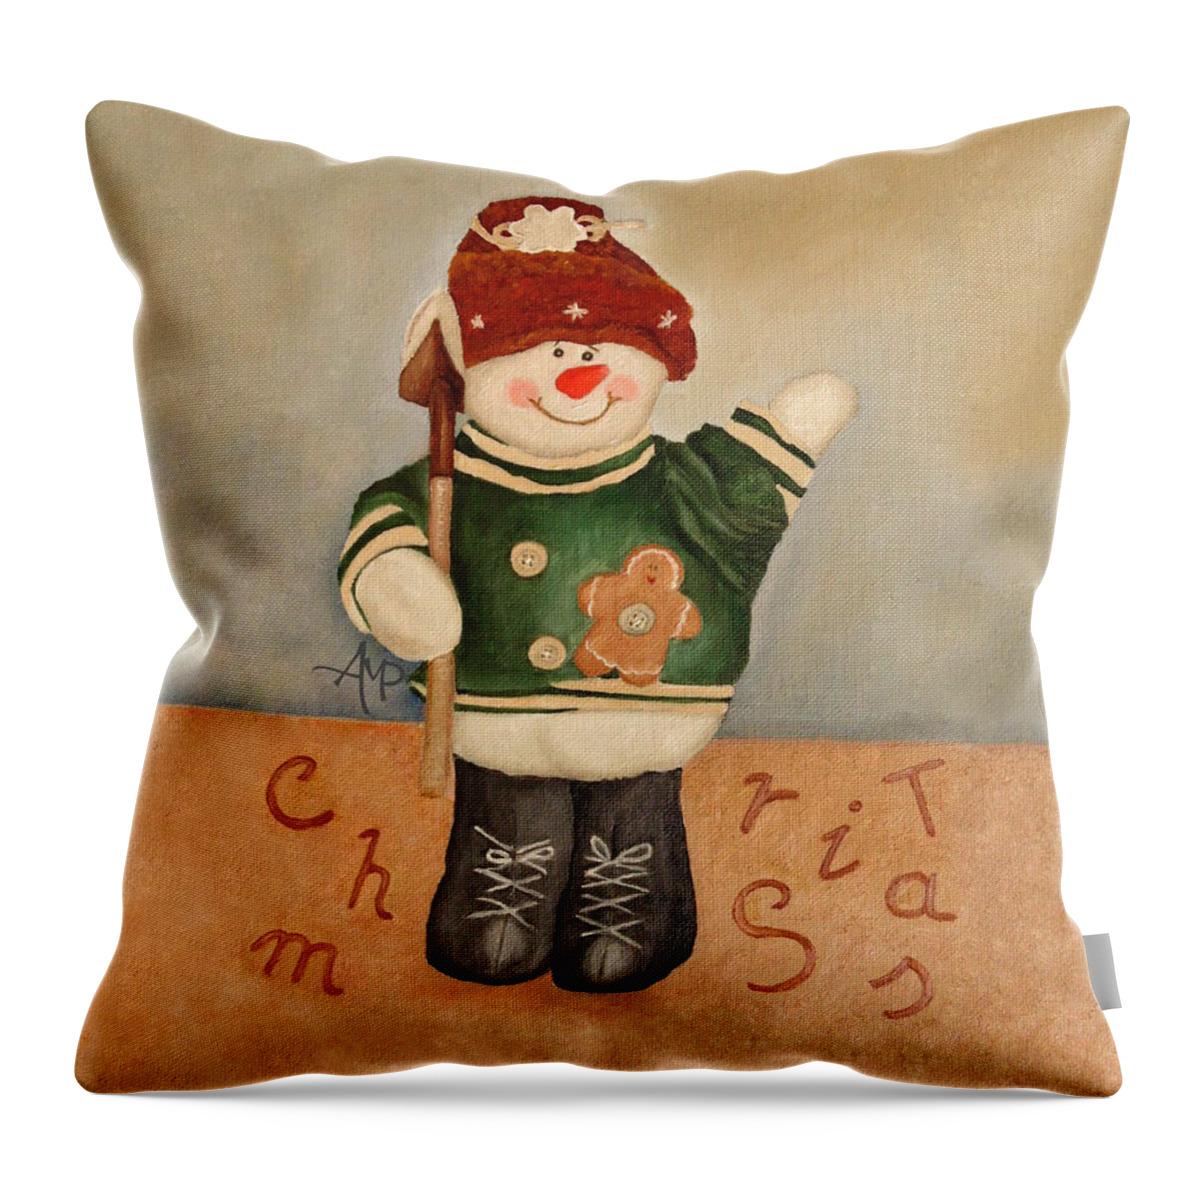 Snowman Throw Pillow featuring the painting Snowman Junior by Angeles M Pomata